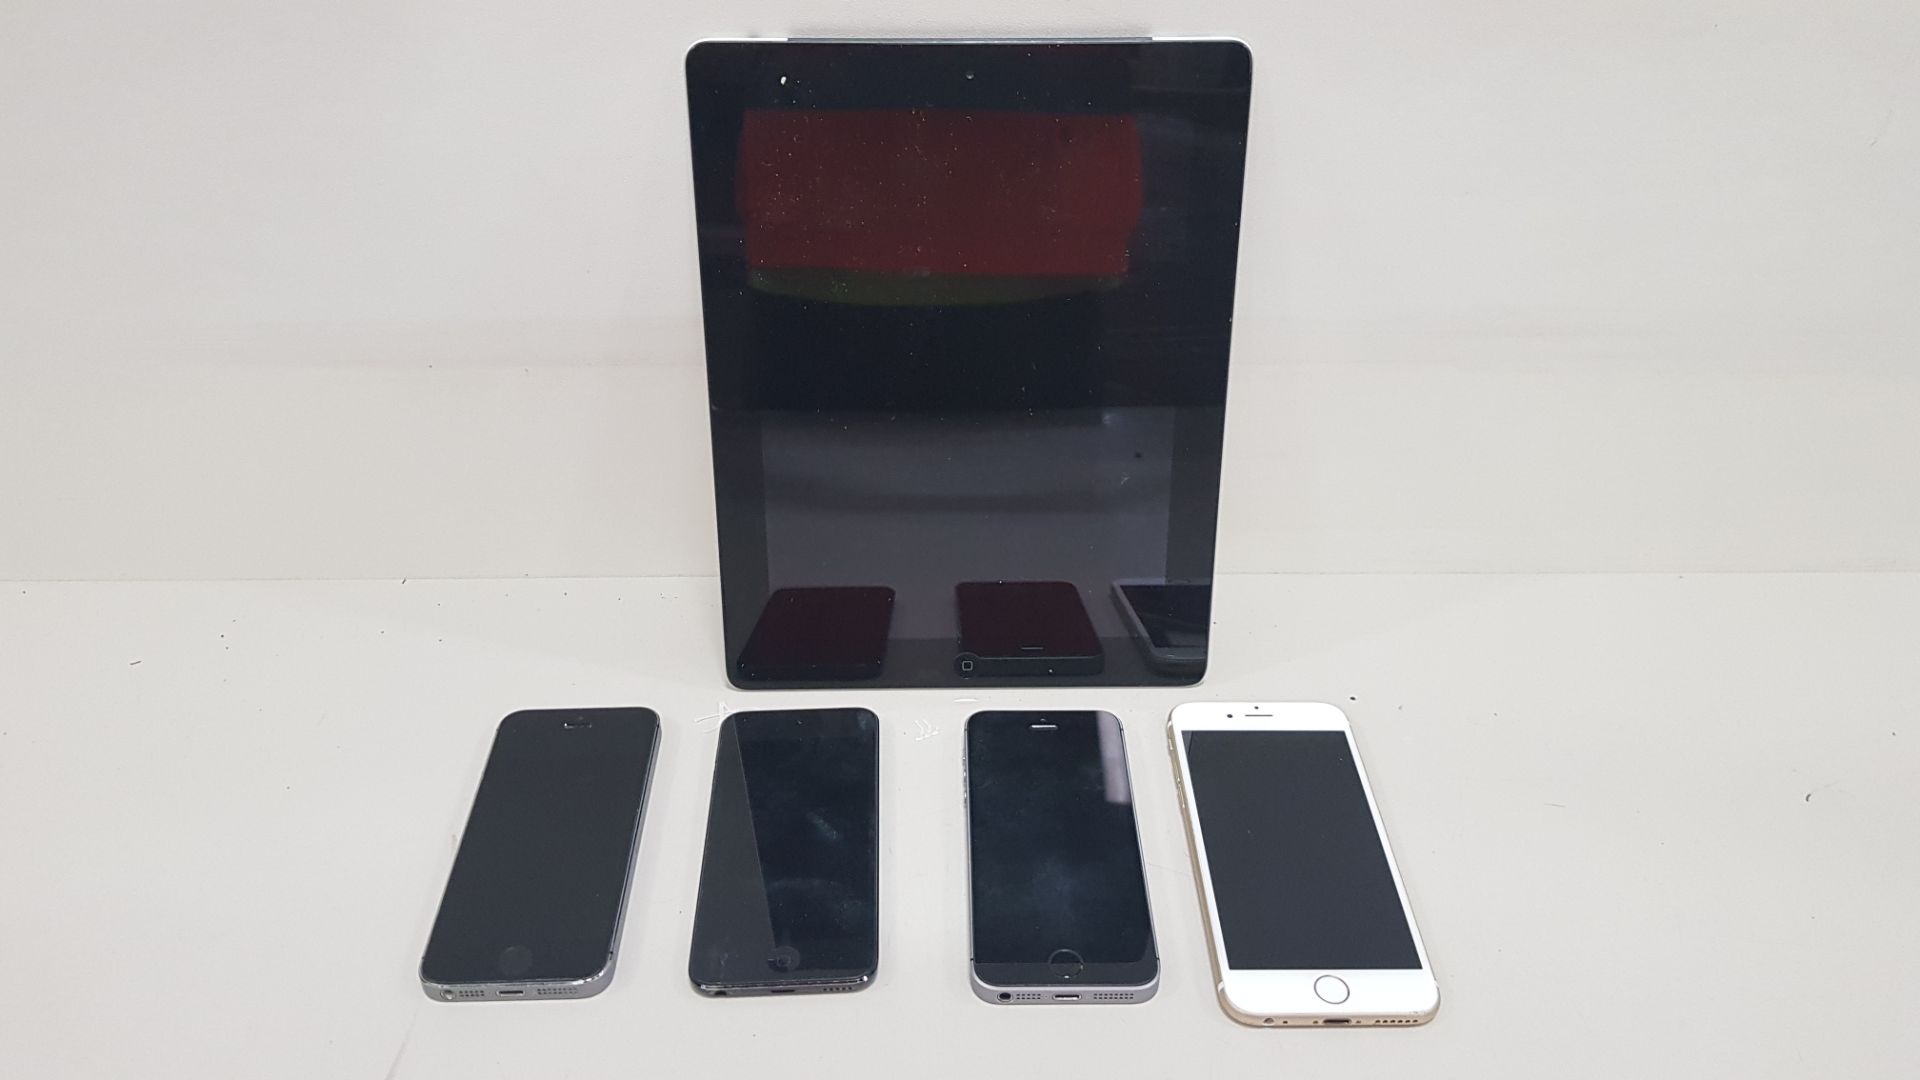 1 X APPLE IPAD TABLET, 1 X IPOD TOUCH 6TH GEN, 1 X IPHONE 6 AND 2 X IPHONE 5 ALL FOR SPARES